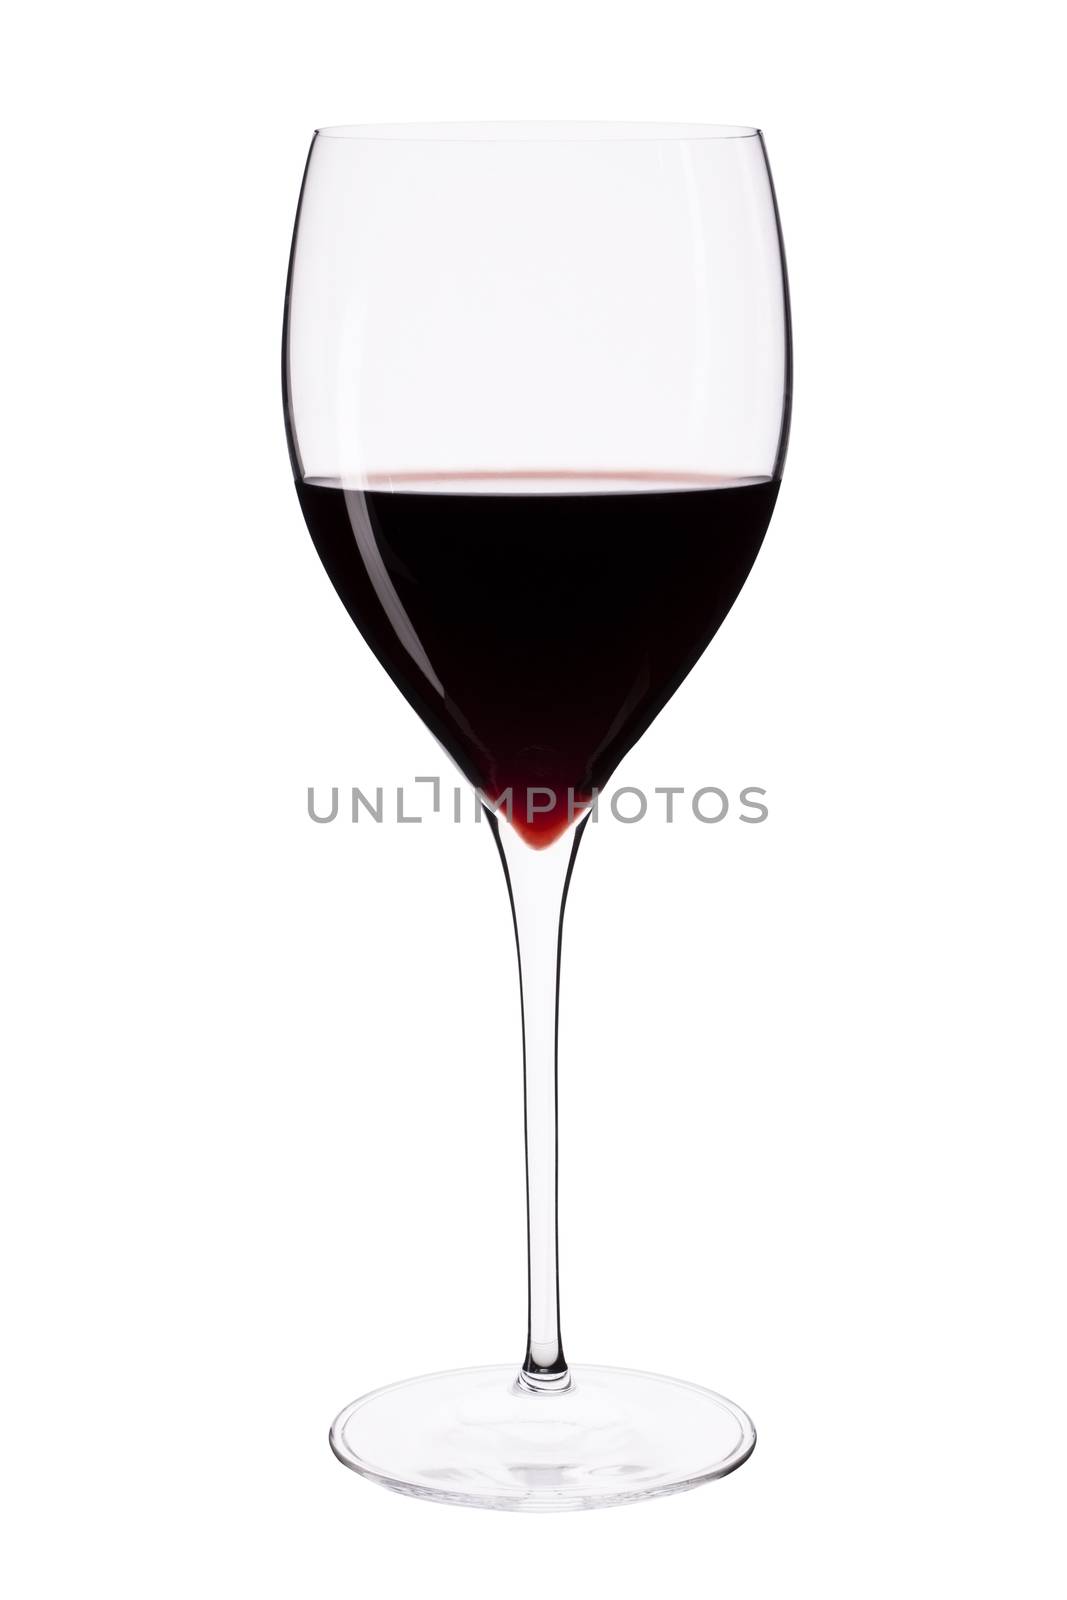 Elegant crystal wine glass with red wine isolated on white background with clipping path.